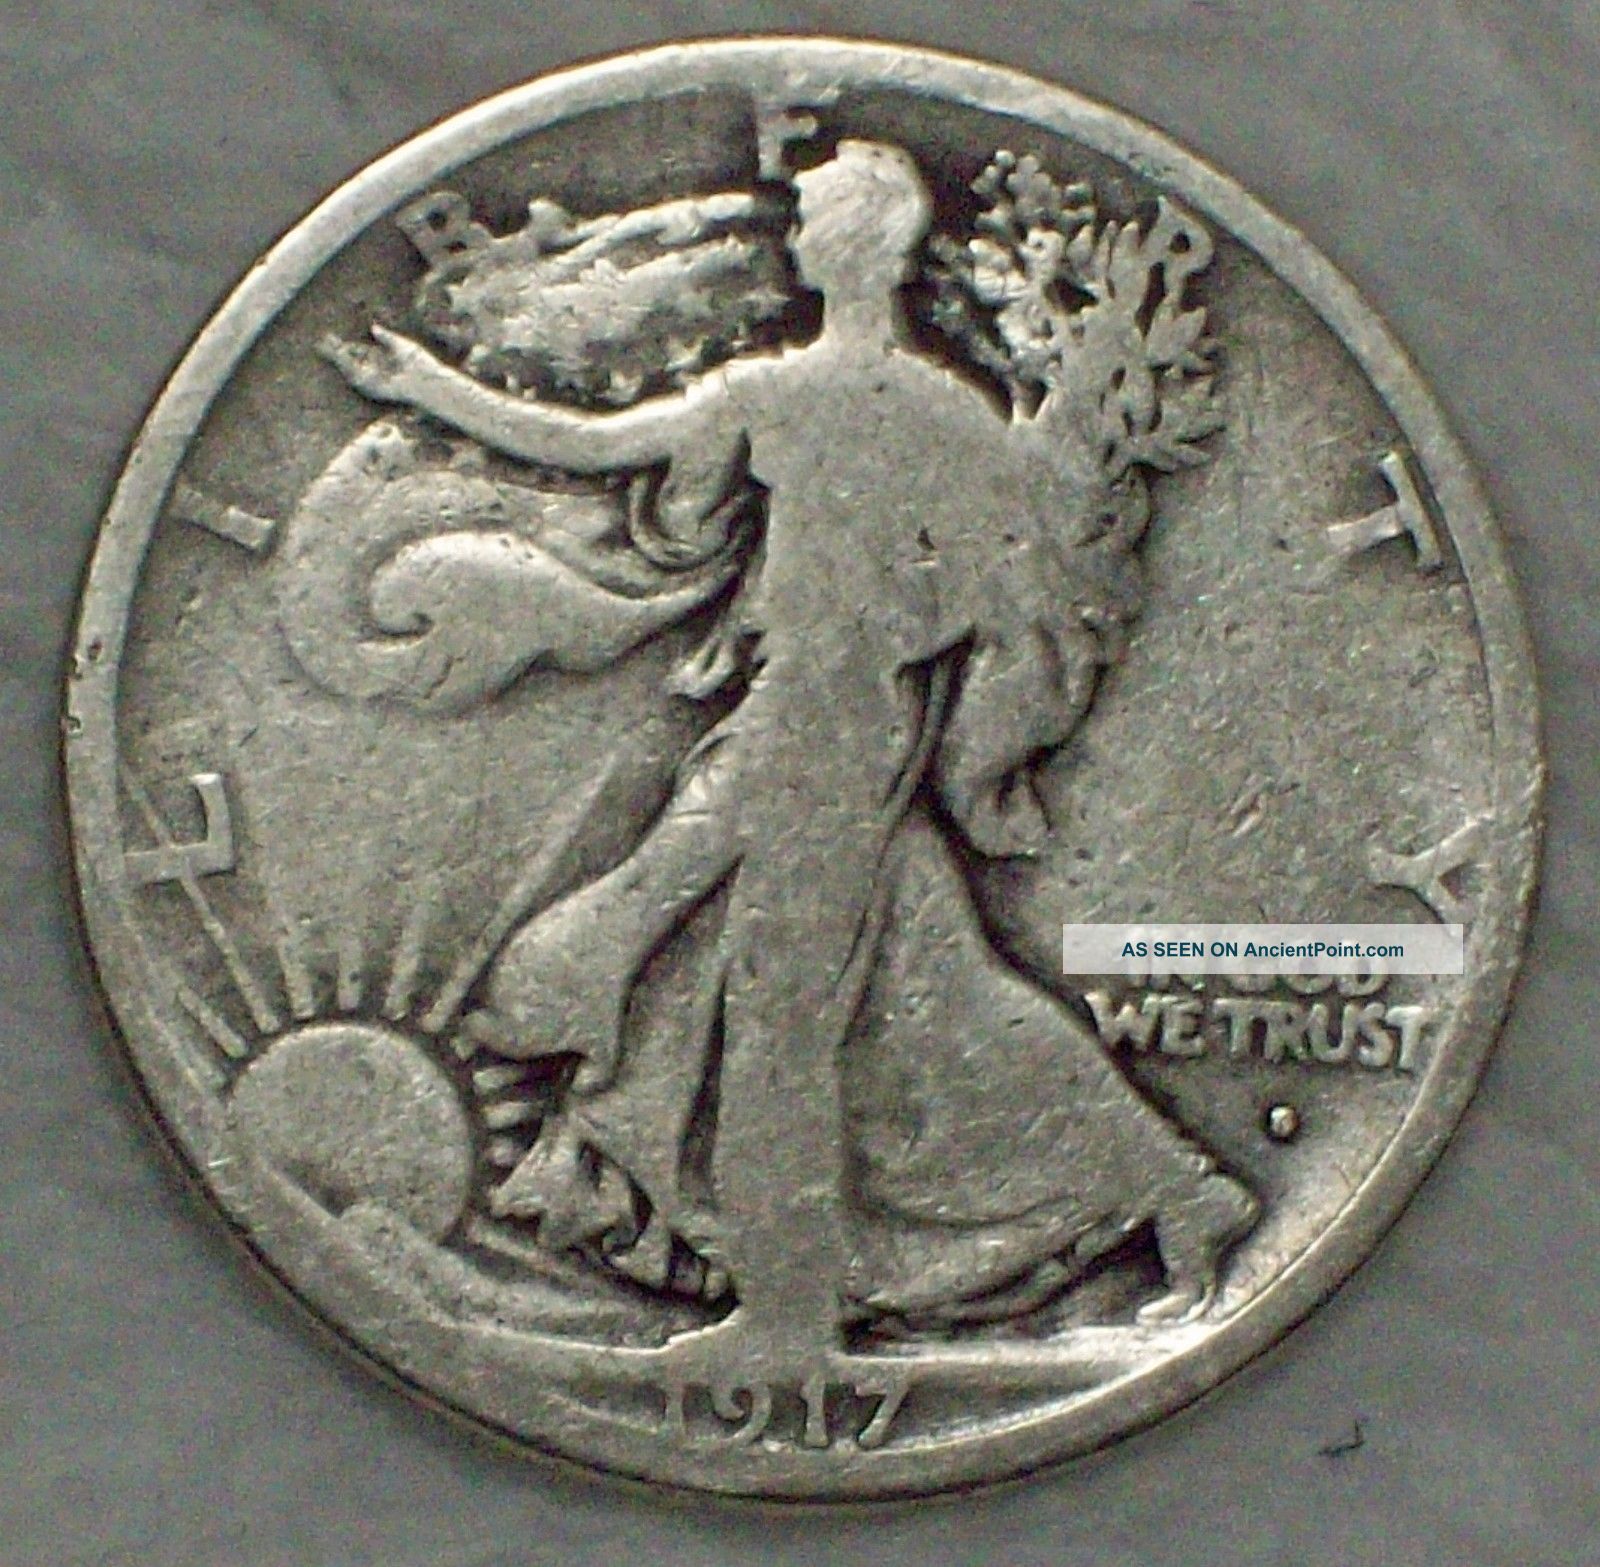 1917 S Silver Walking Liberty Half Dollar Obverse Mintmark - Nicely Circulated See more 1917-S 50C Obverse Walking Liberty Half Dollar photo